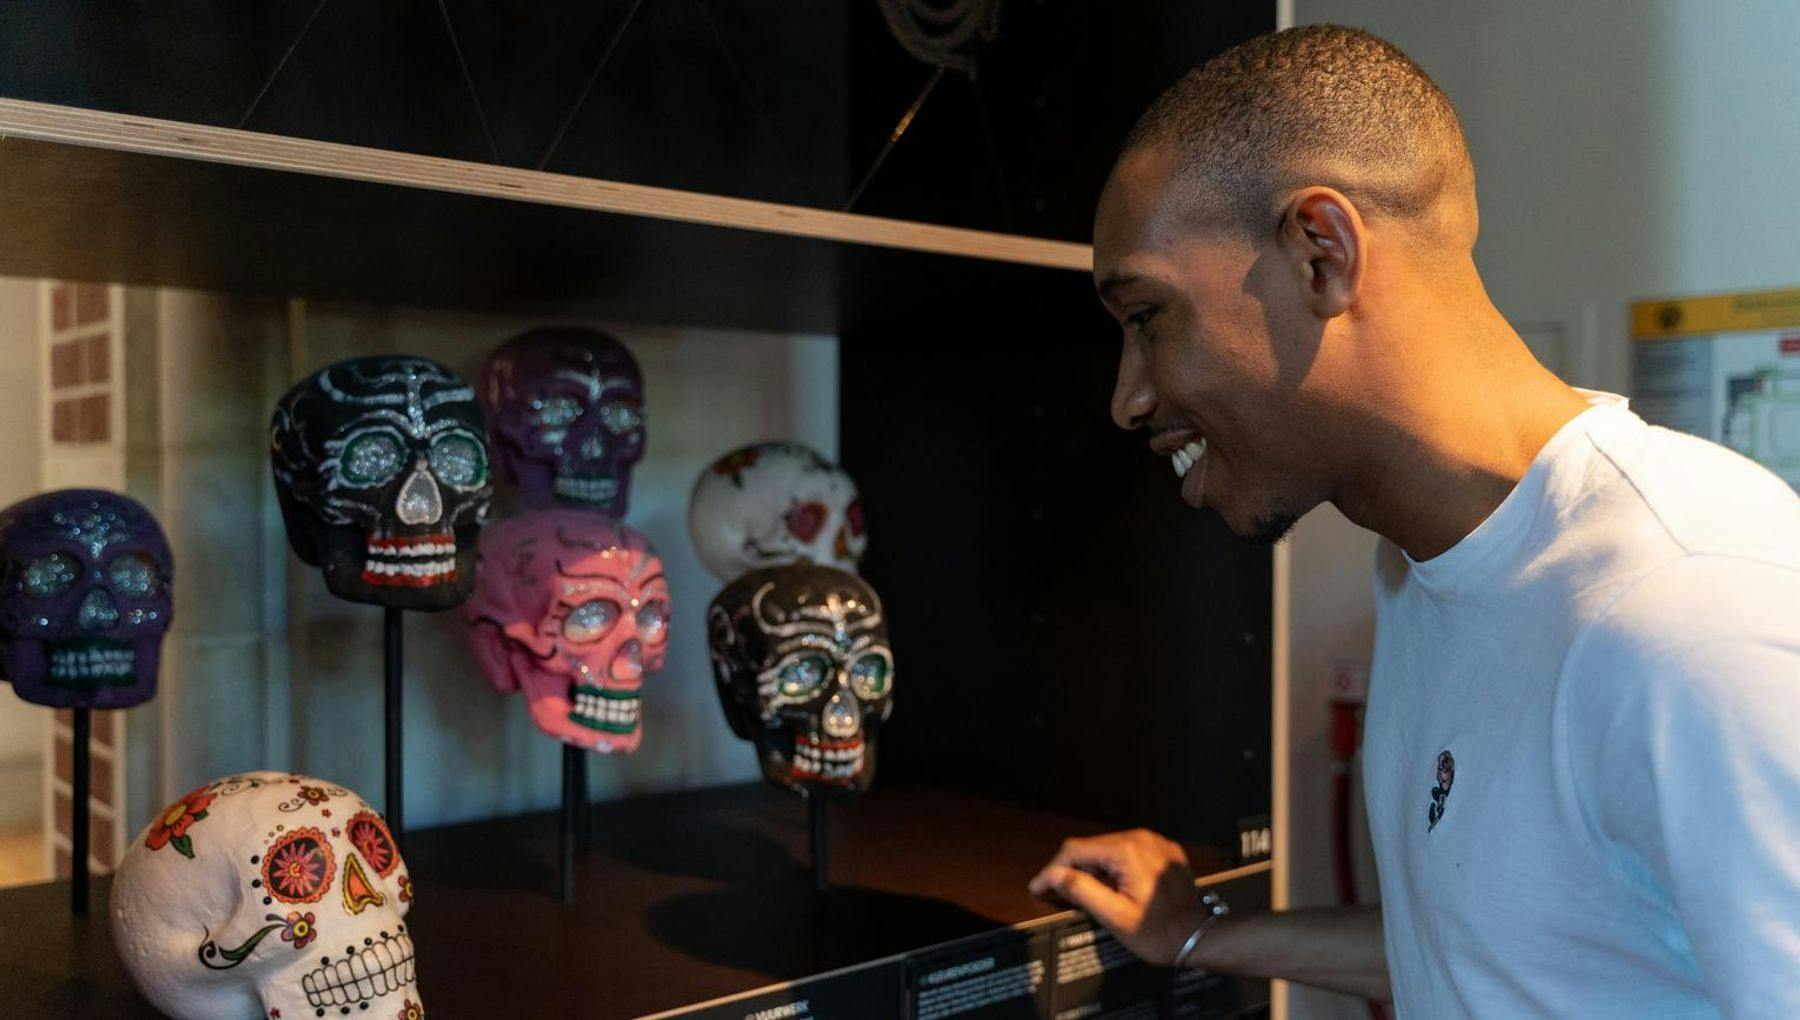 A man looks at decorated skulls that are part of an exhibition at the Tropenmuseum.